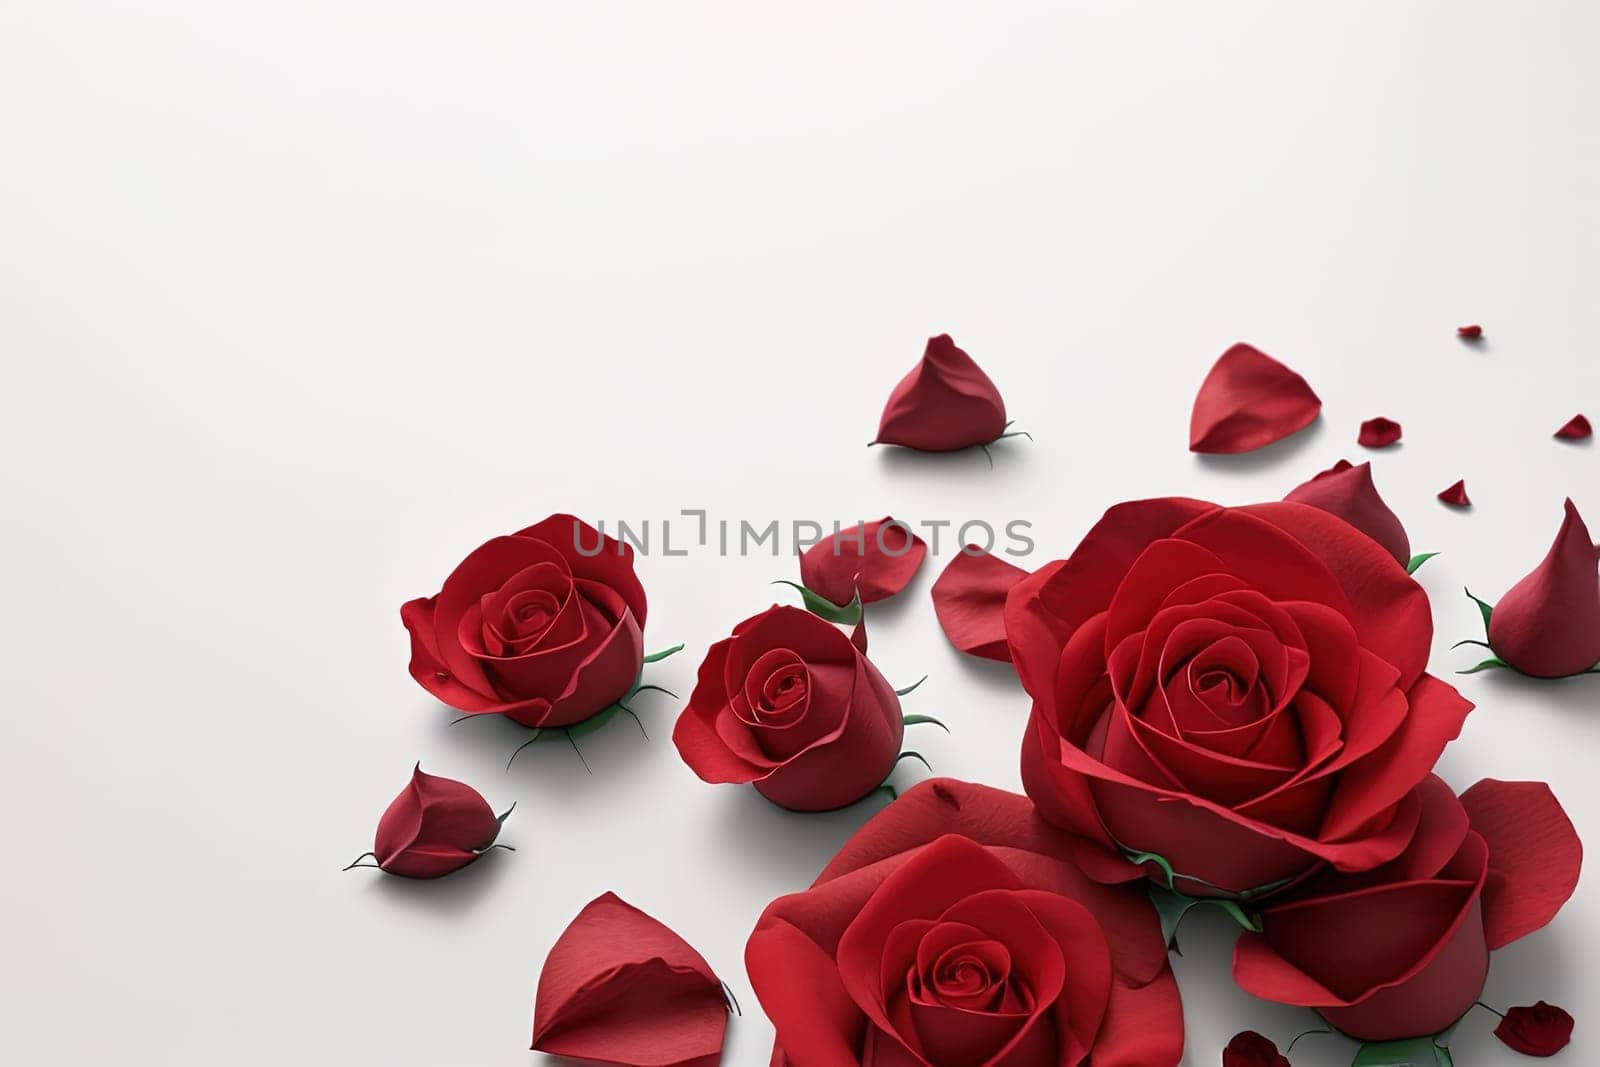 Red roses and rose petals on white background, Valentines day concept.